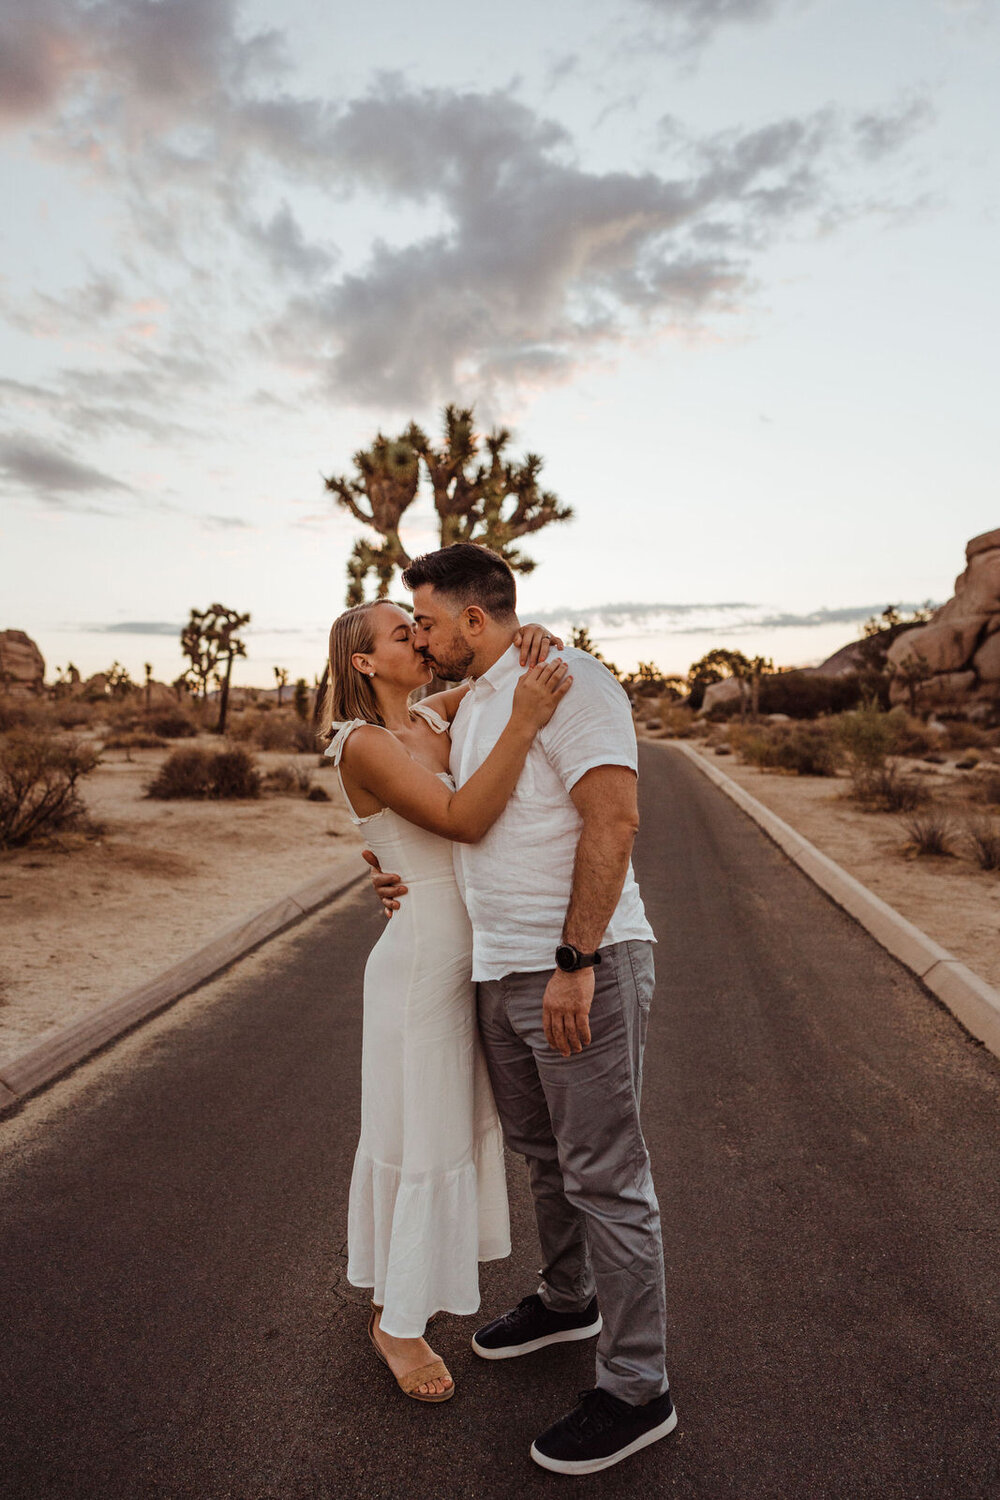 Sunrise Engagement Session in Joshua Tree, California - Man and Woman Kiss in the Middle of the Road - Photos by Adventurous Elopement + Wedding Photographer Kept Record | www.keptrecord.com